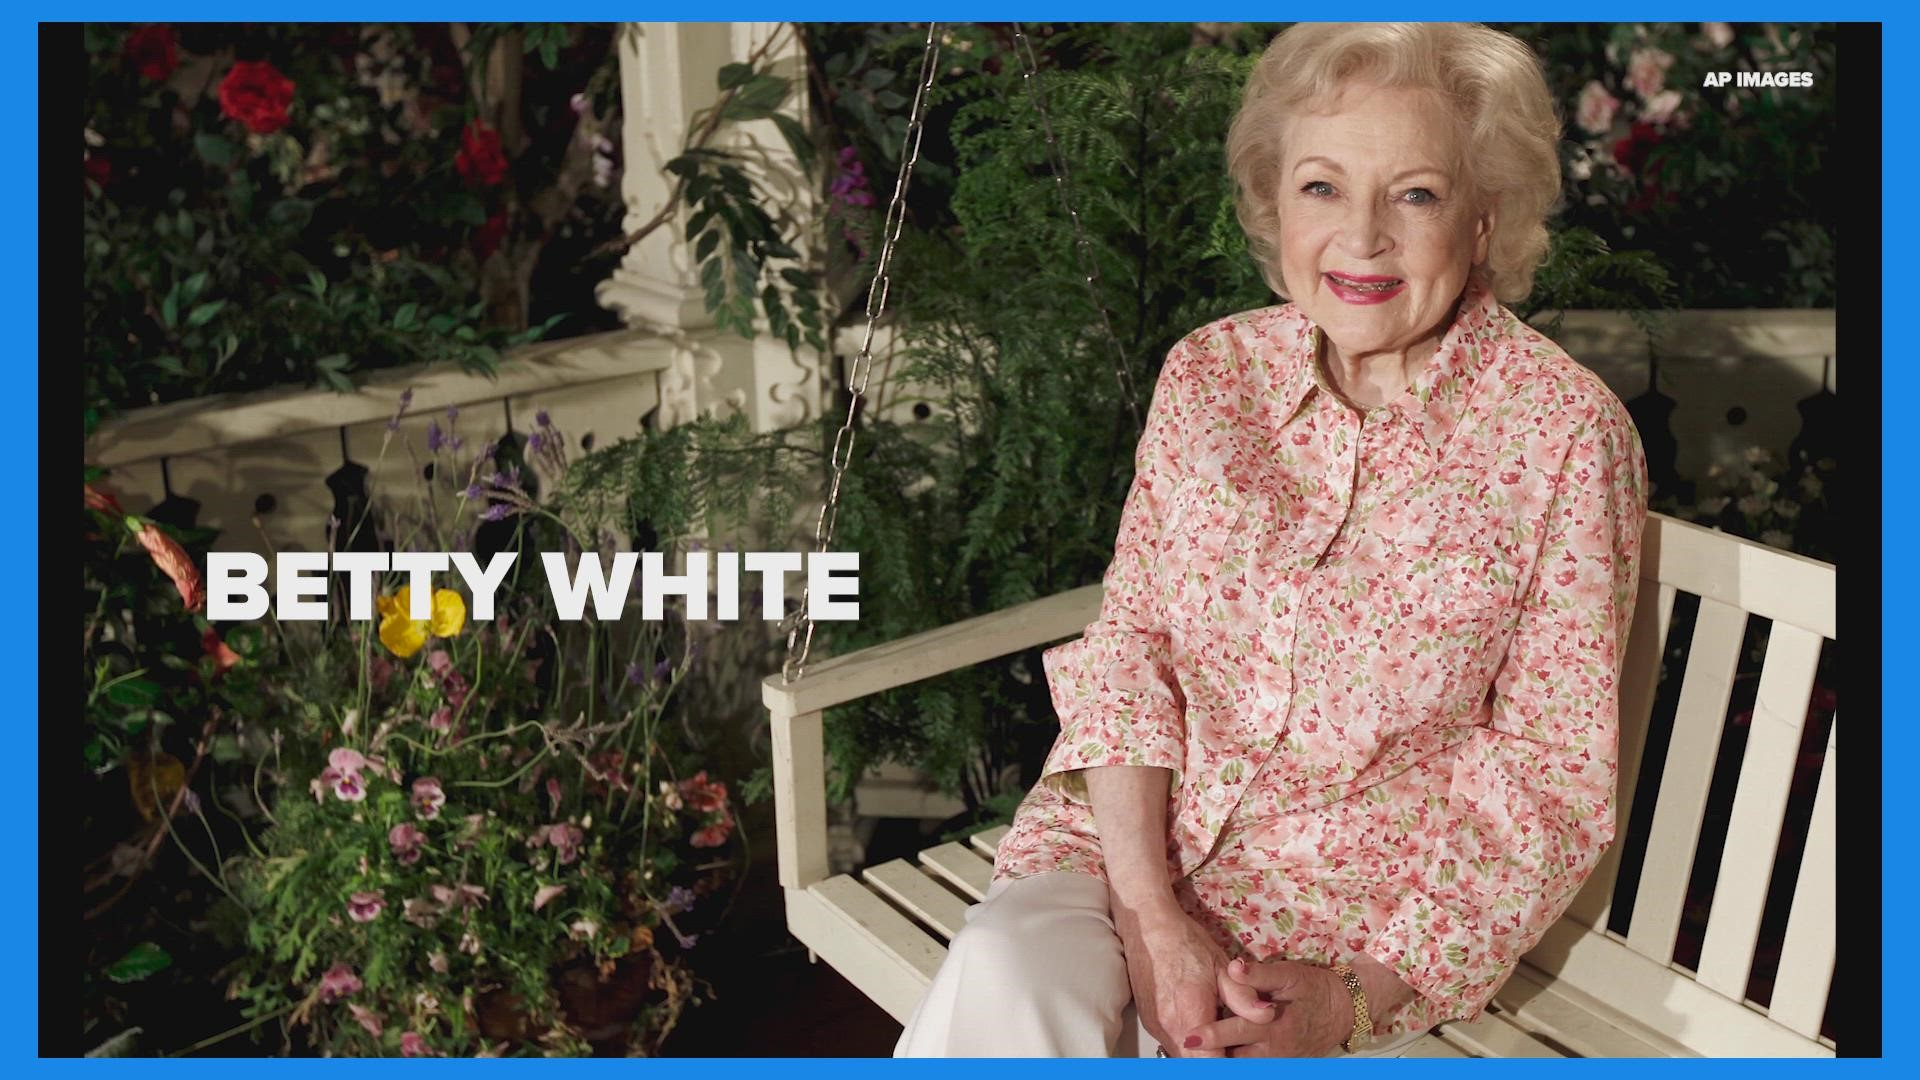 Betty White has died at age 99, according to reports.